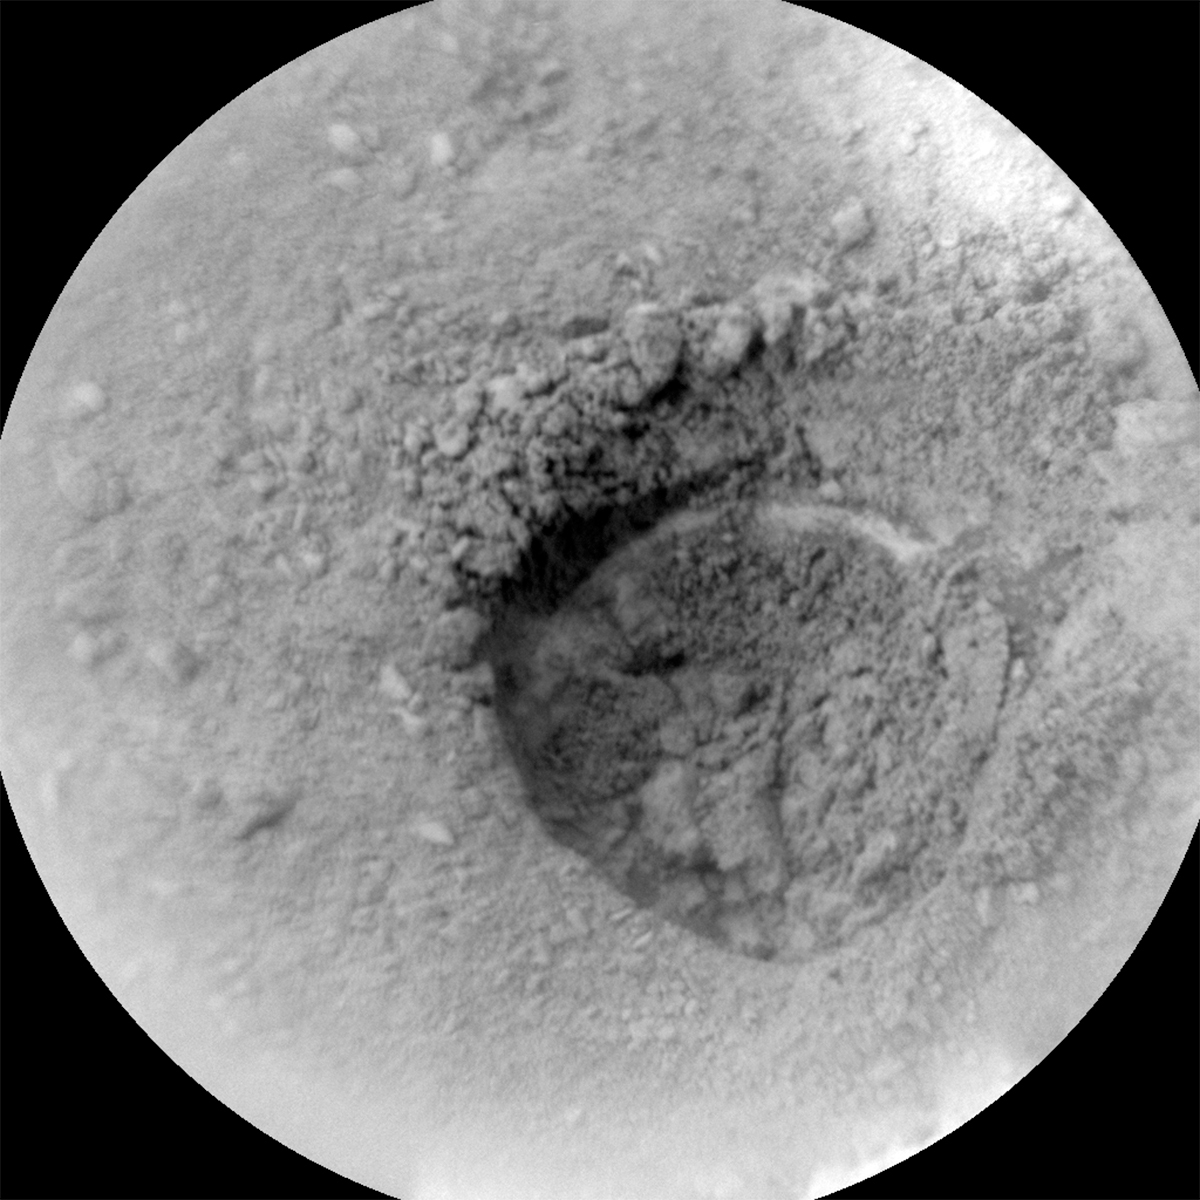 This image of a hole in the soil was taken by Chemistry &amp; Camera (ChemCam) onboard NASA's Mars rover Curiosity on Sol 3720.